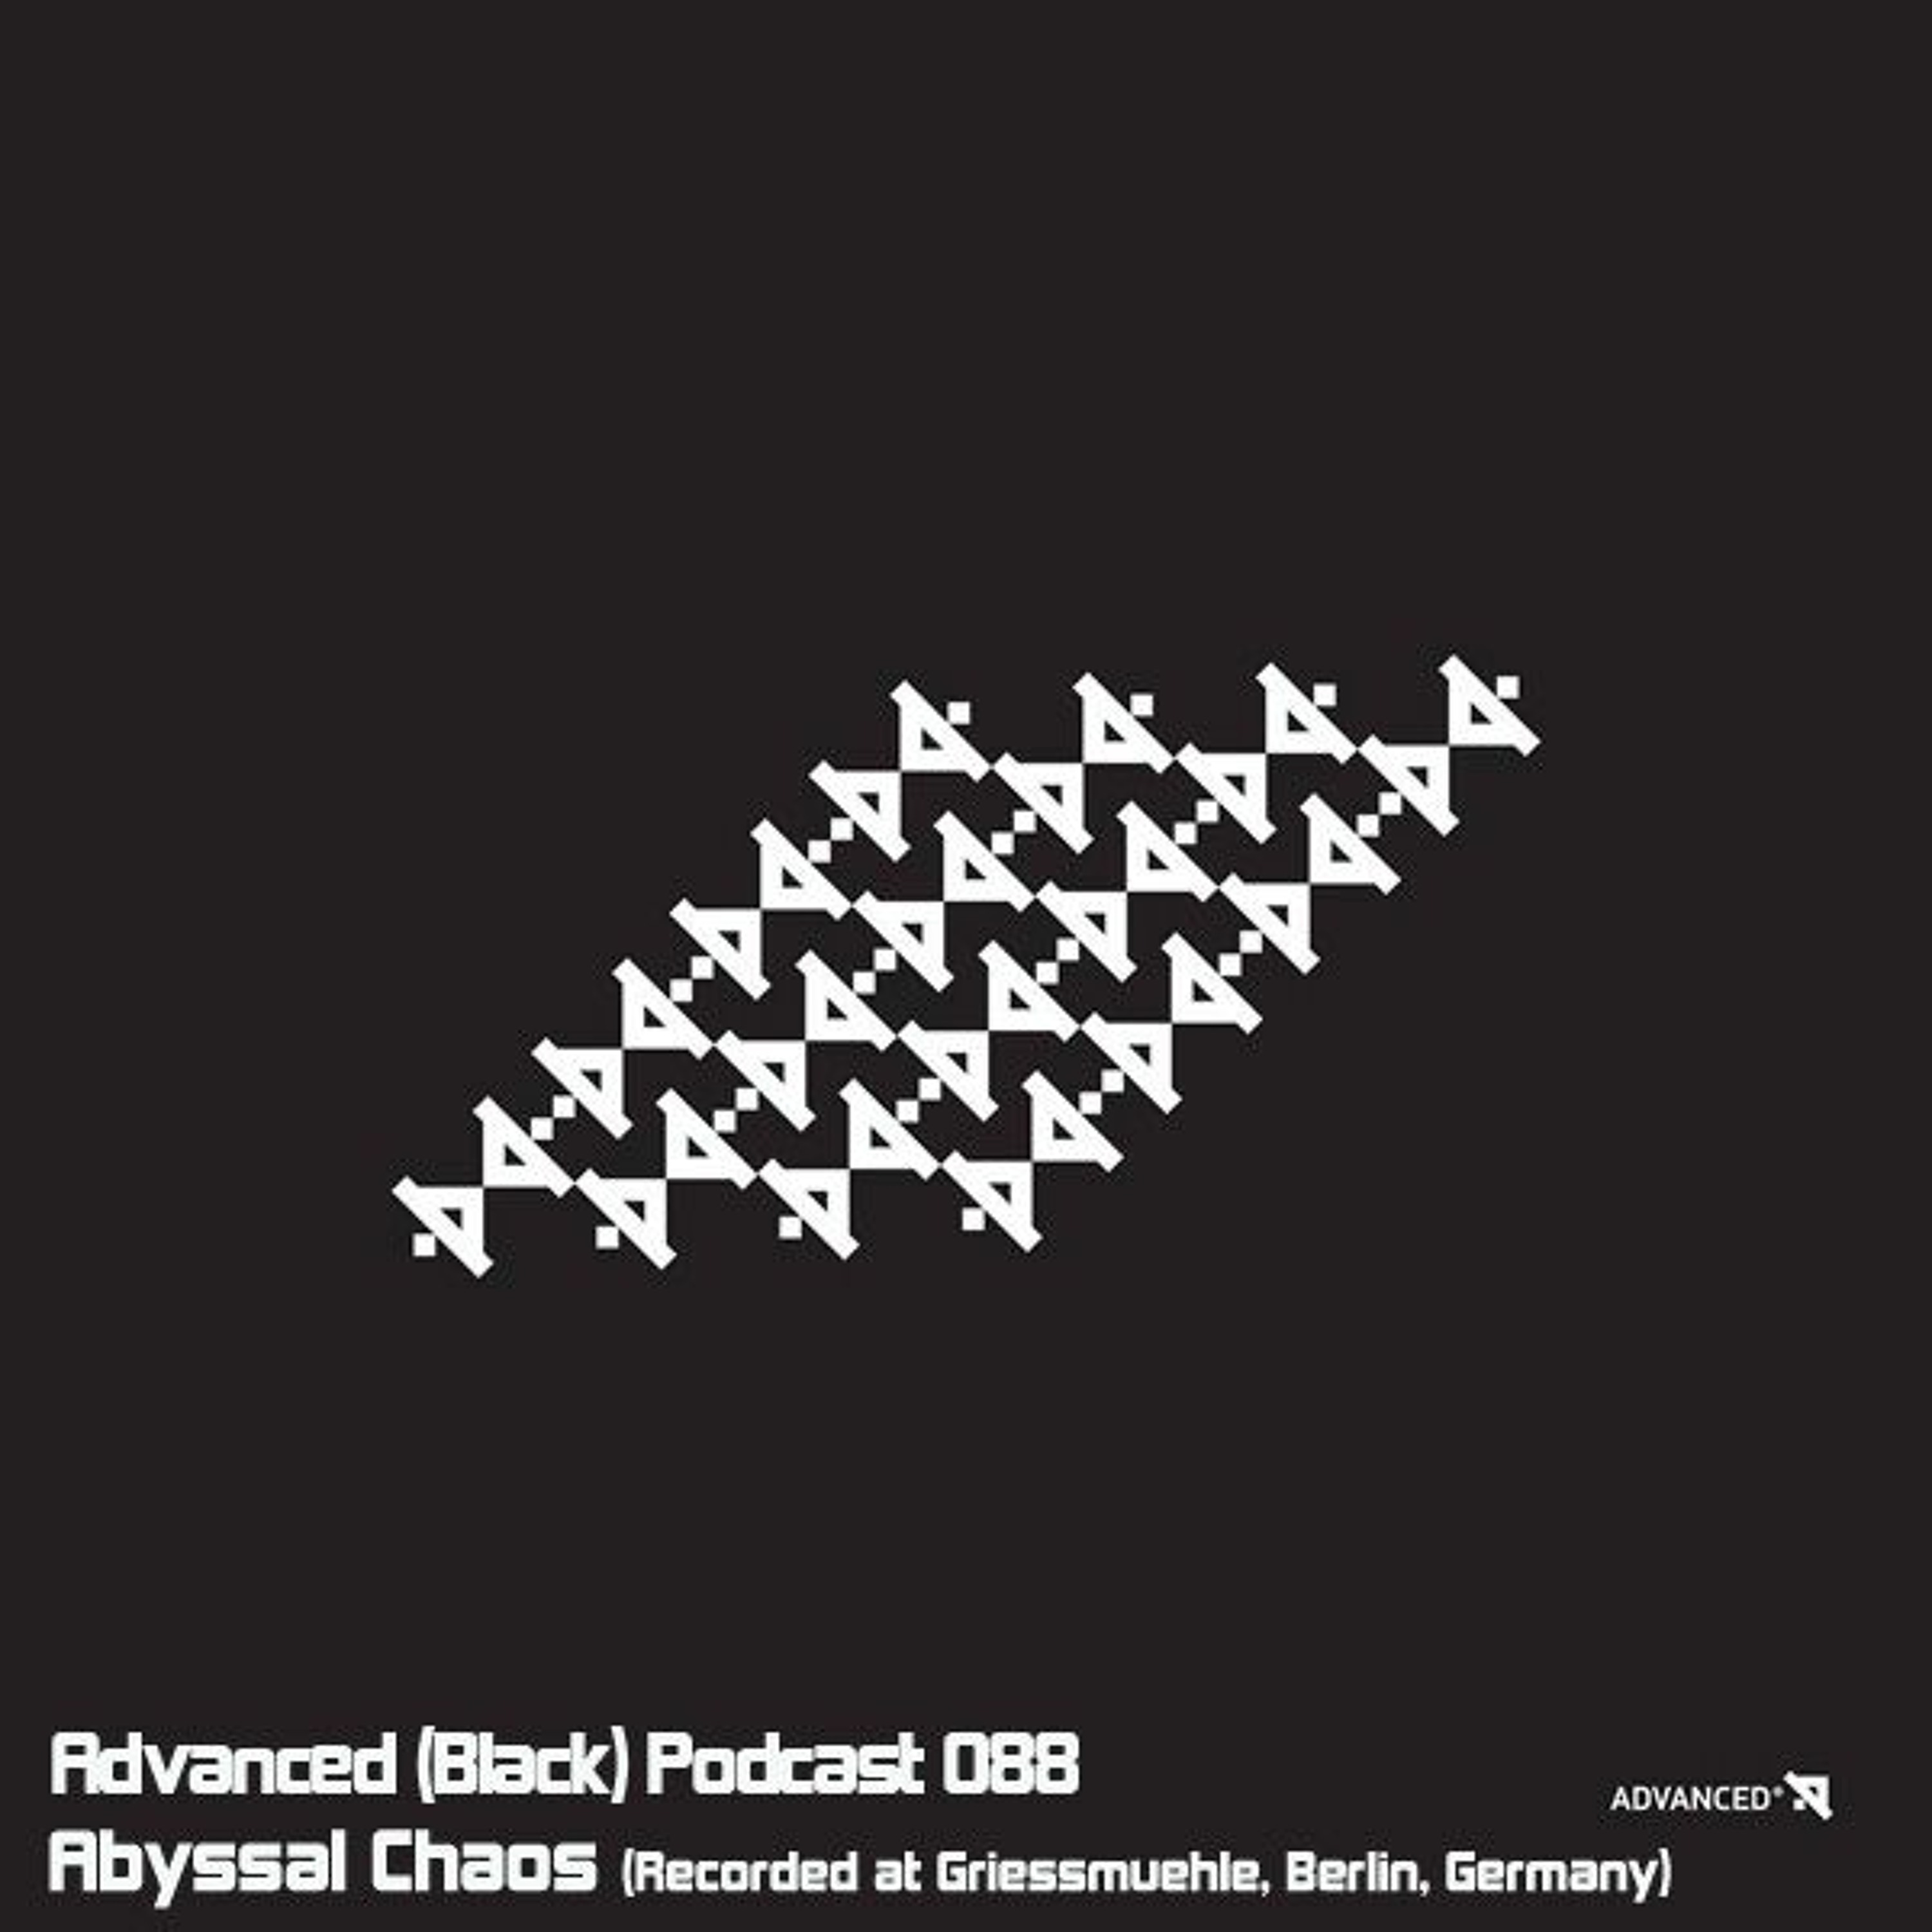 Advanced (Black) Podcast 088 with Abyssal Chaos (Recorded at Griessmuehle, Berlin, Germany)